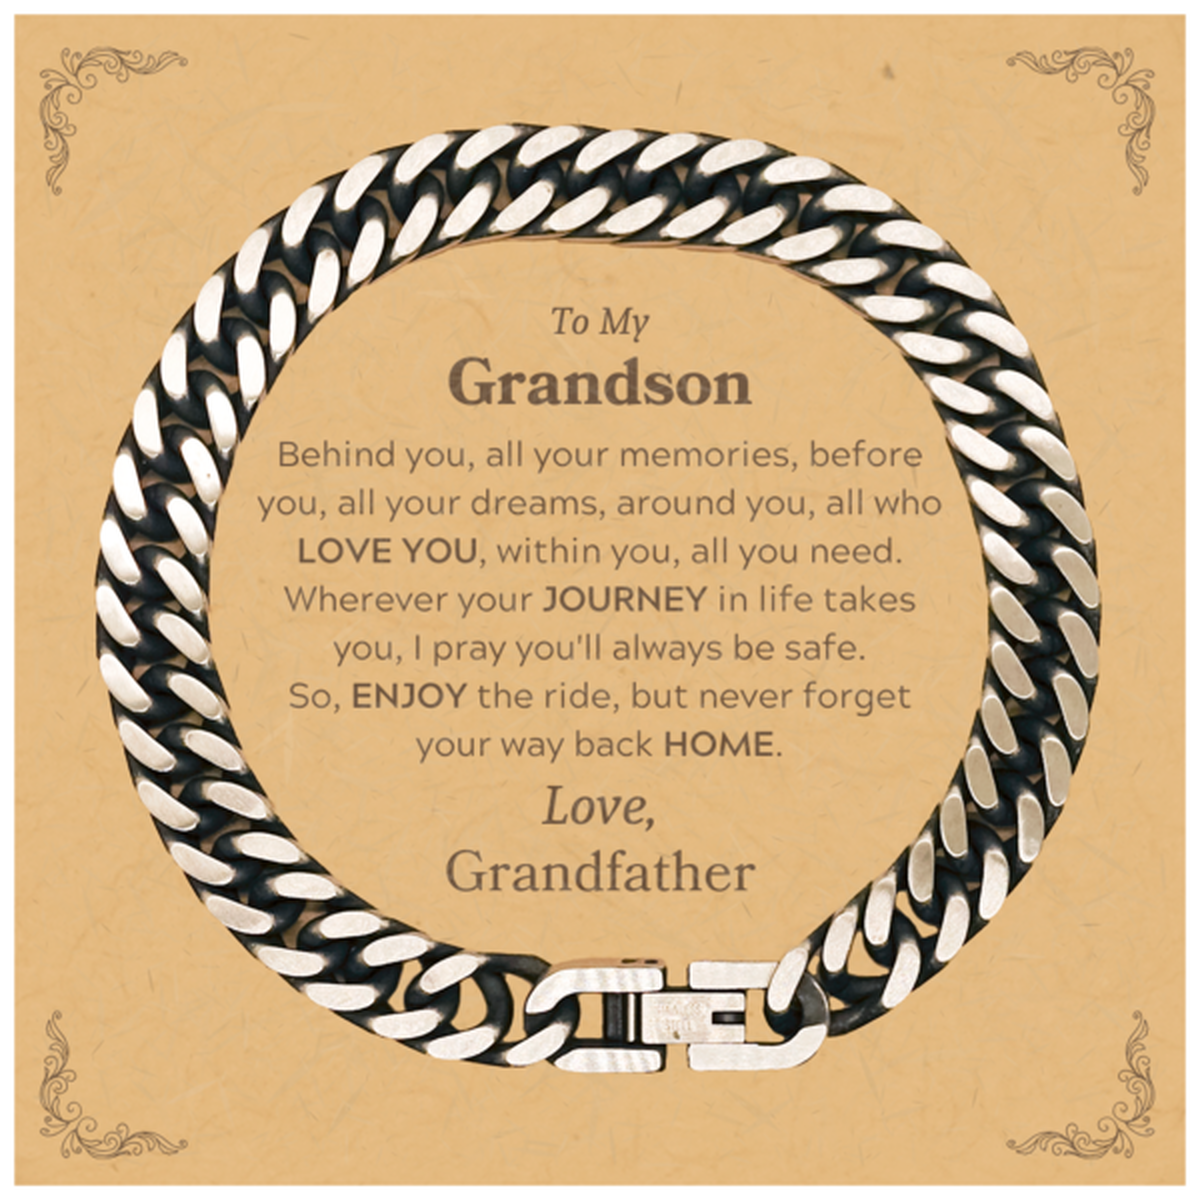 To My Grandson Graduation Gifts from Grandfather, Grandson Cuban Link Chain Bracelet Christmas Birthday Gifts for Grandson Behind you, all your memories, before you, all your dreams. Love, Grandfather